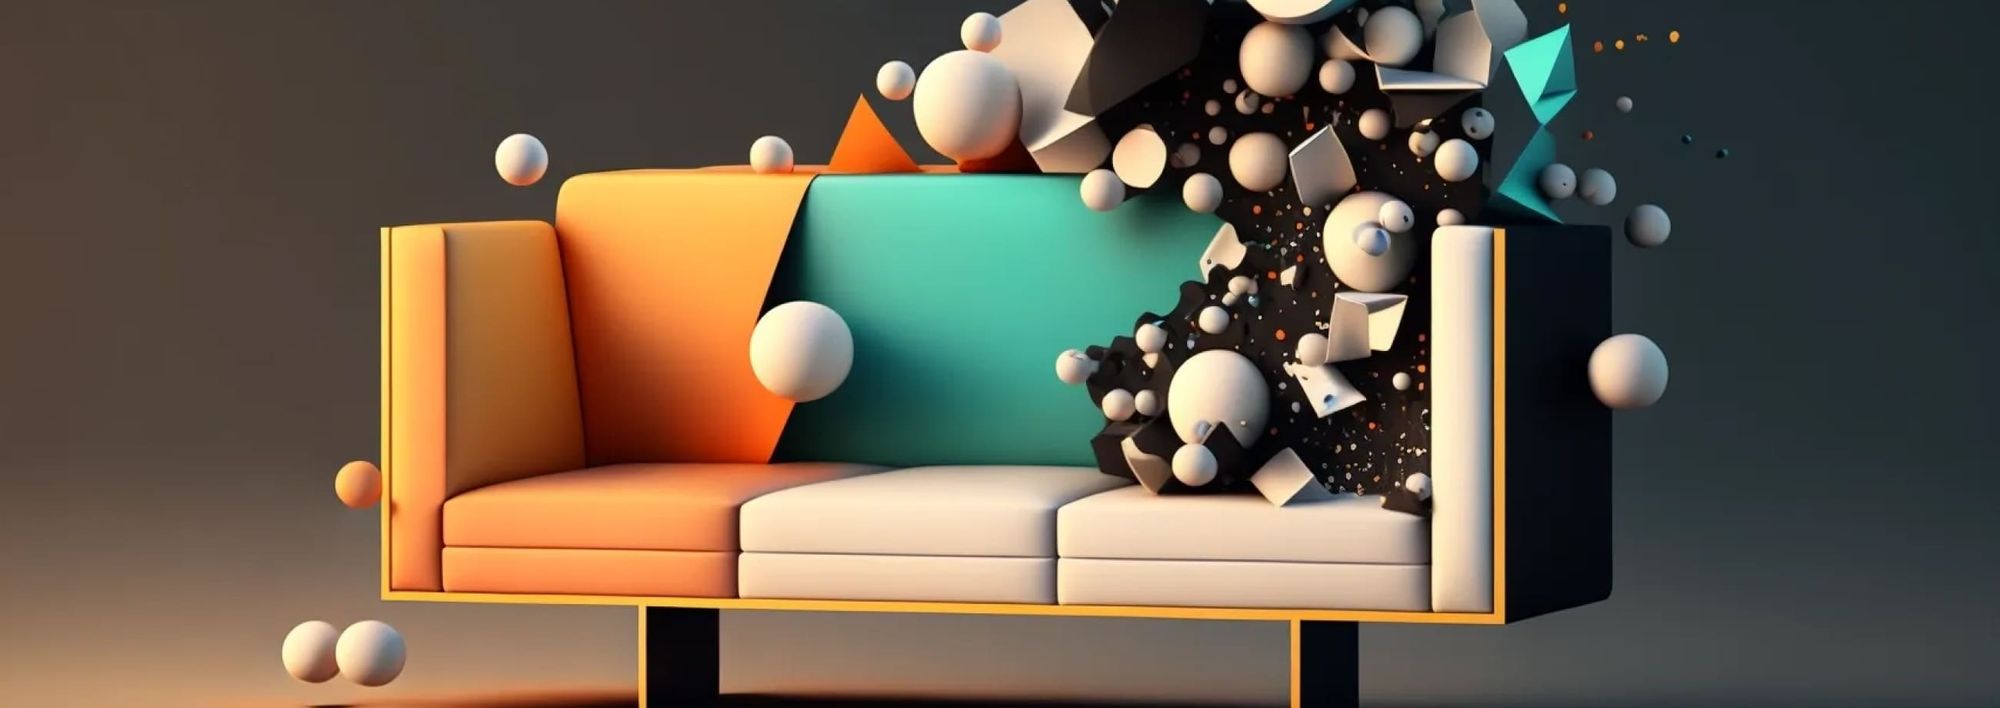 3D style orange and green color sofa with white 3d balls